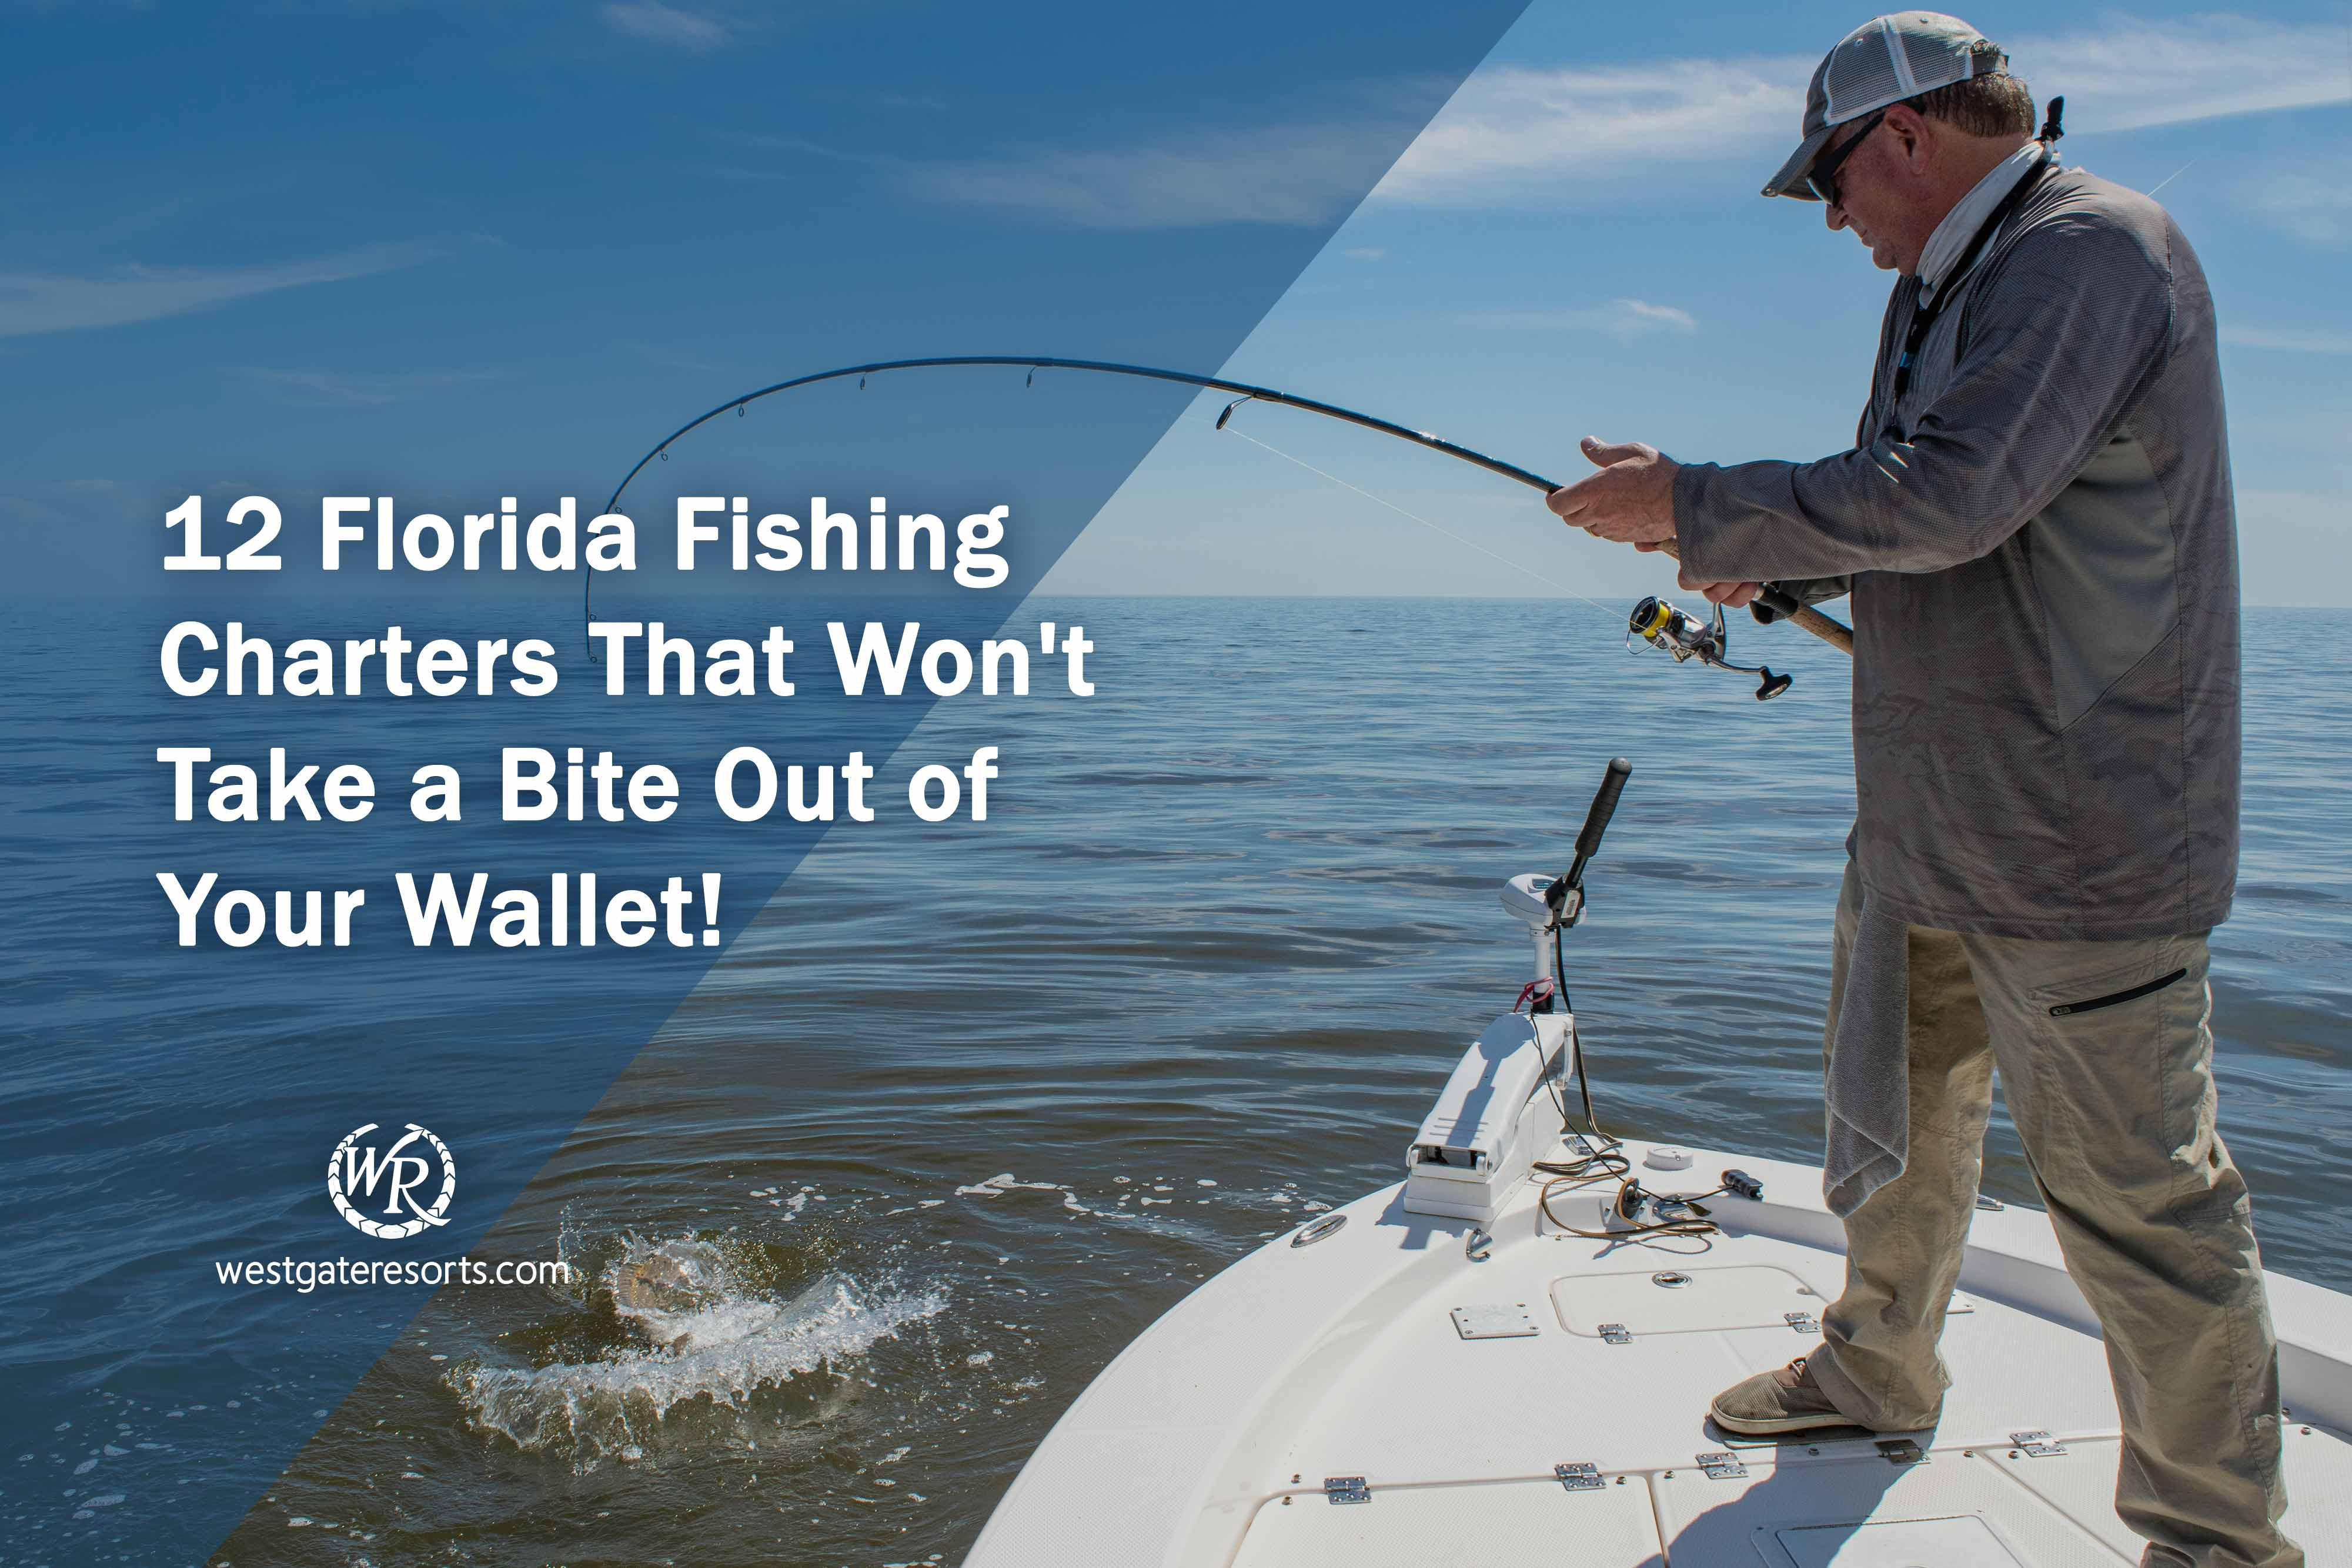 12 Florida Fishing Charters That Won't Take a Bite Out of Your Wallet!